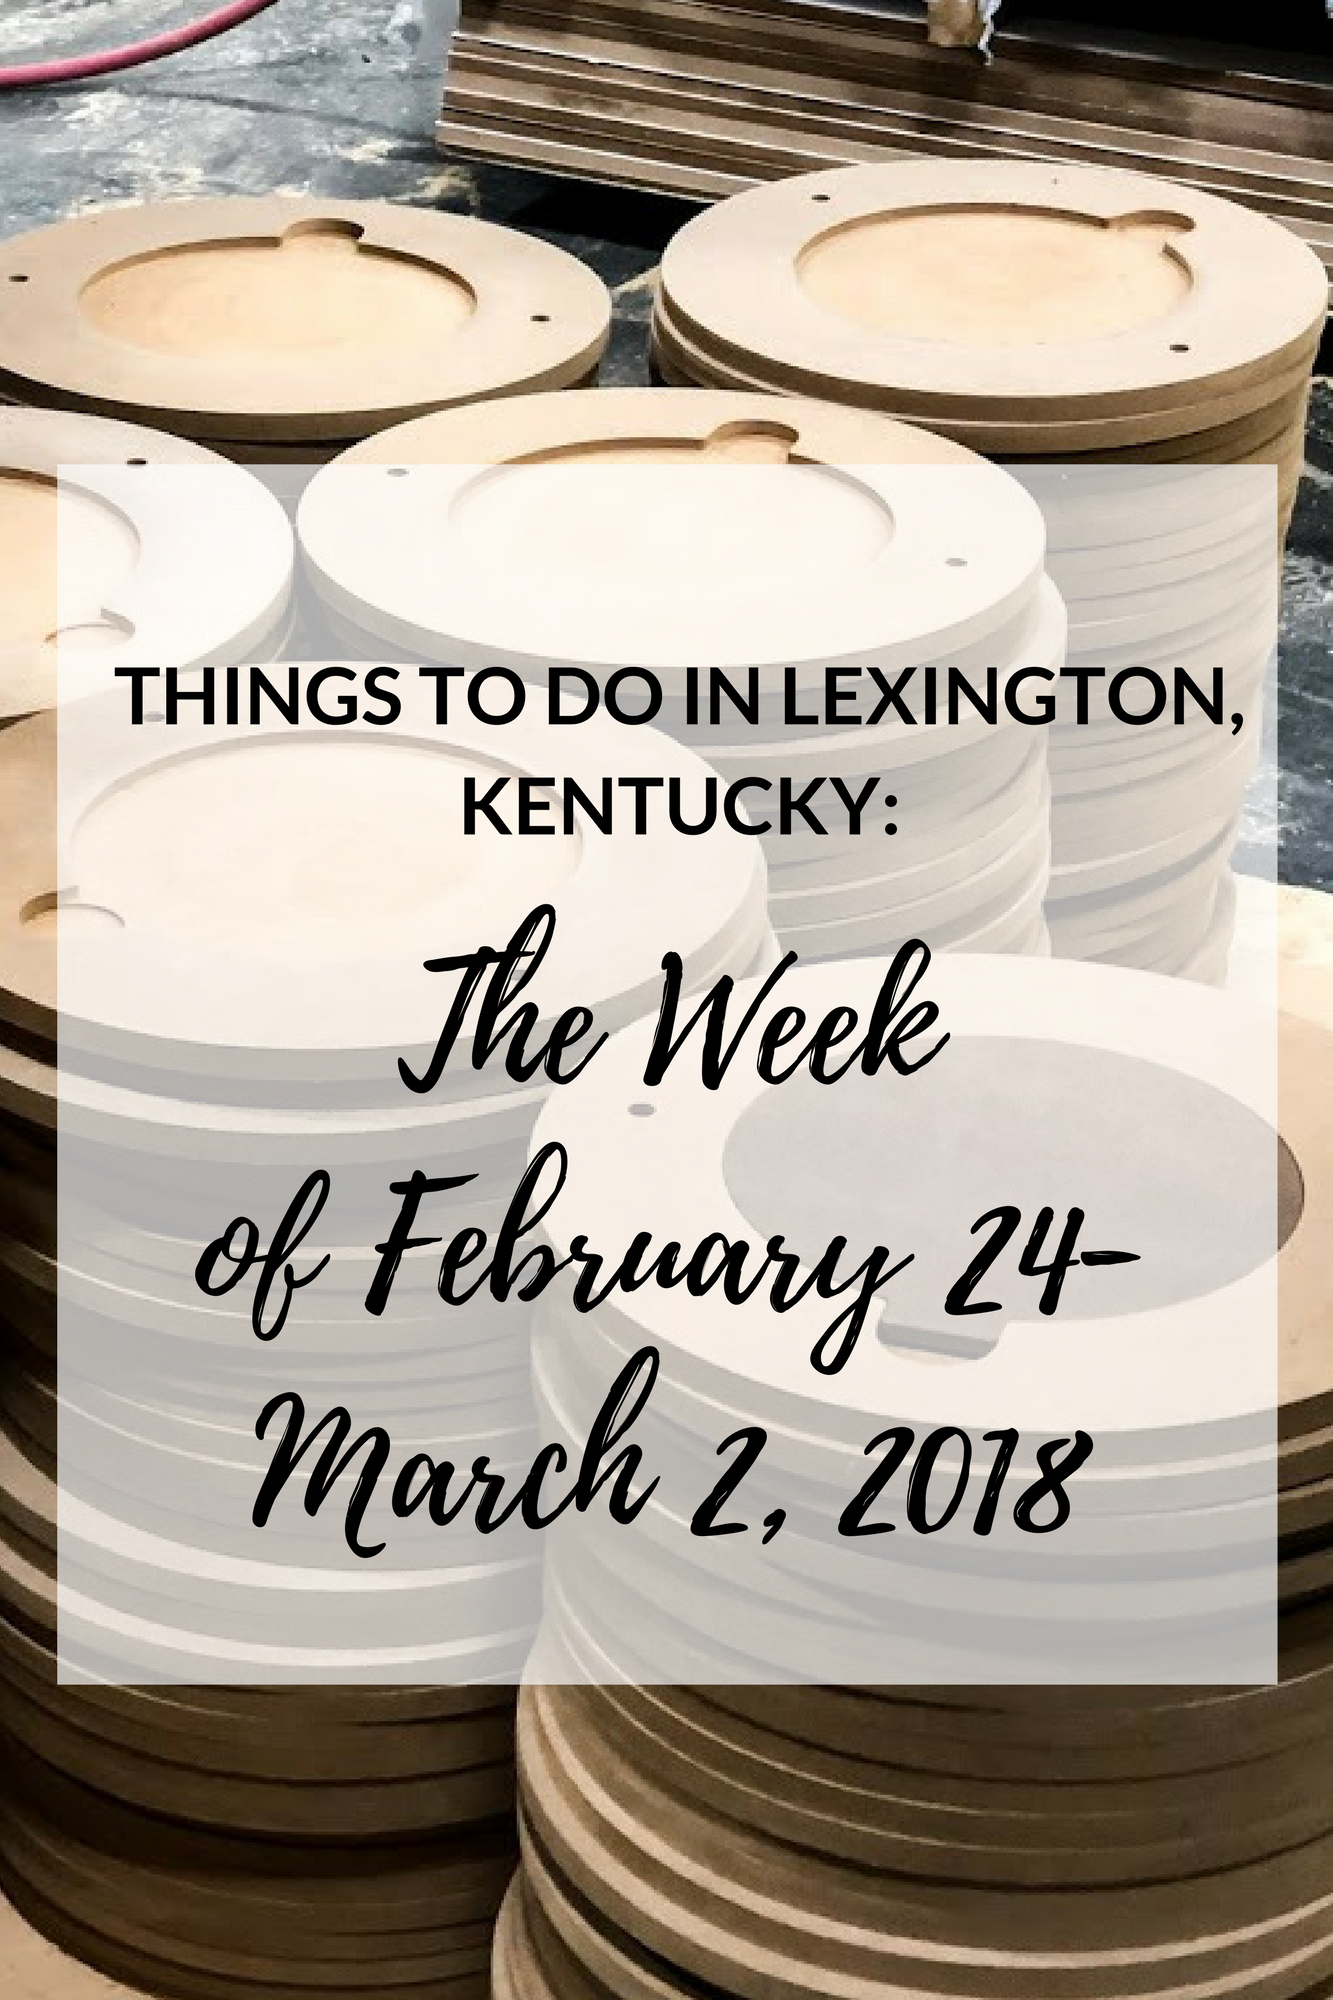 Things to Do in Lexington, Kentucky: The Week of February 24-March 2, 2018